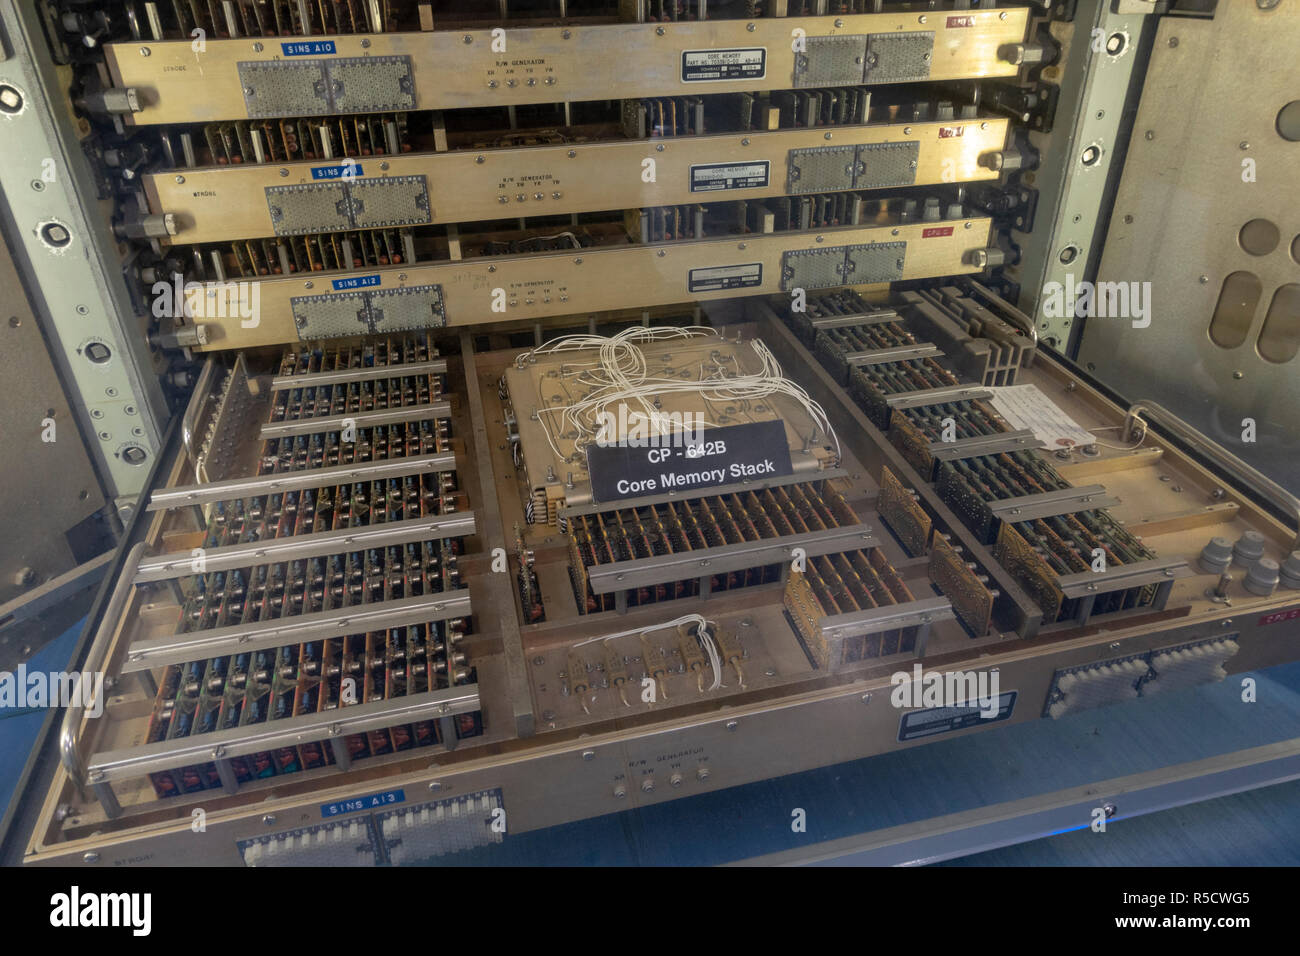 The Univac CP-642B computer memory stack, SINS room (Ships Inertial Navigation System), USS Midway, San Diego, California, United States. Stock Photo